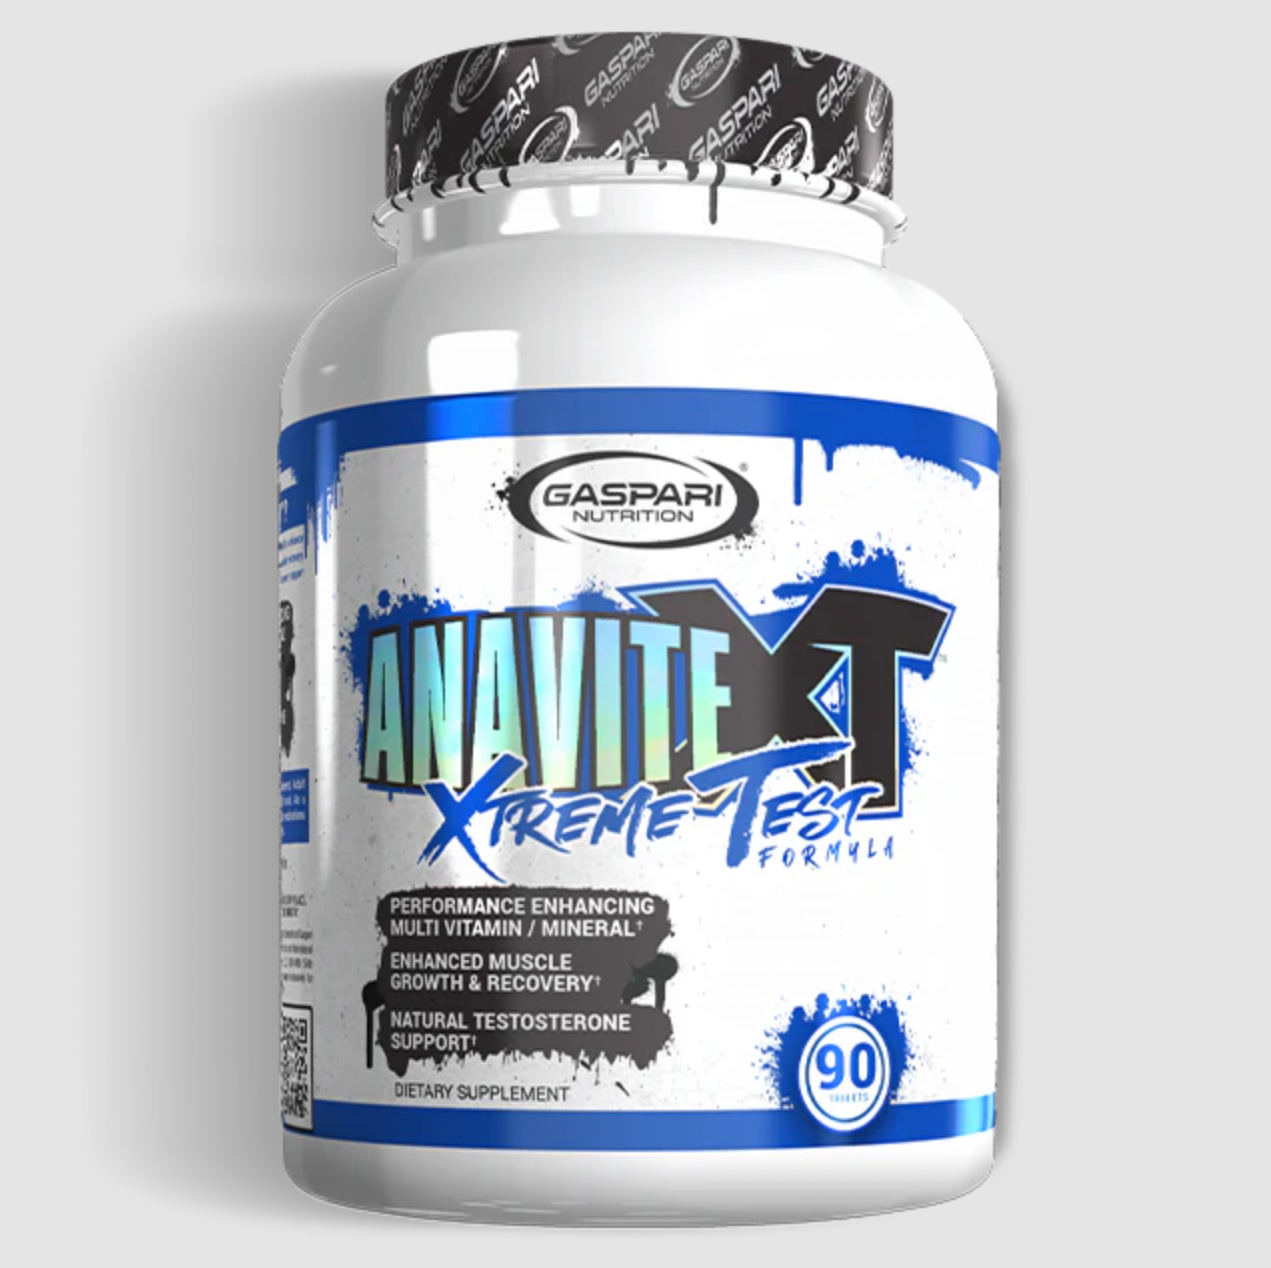 Picture of Anavite XT multi-vitamin and testosterone supplement.